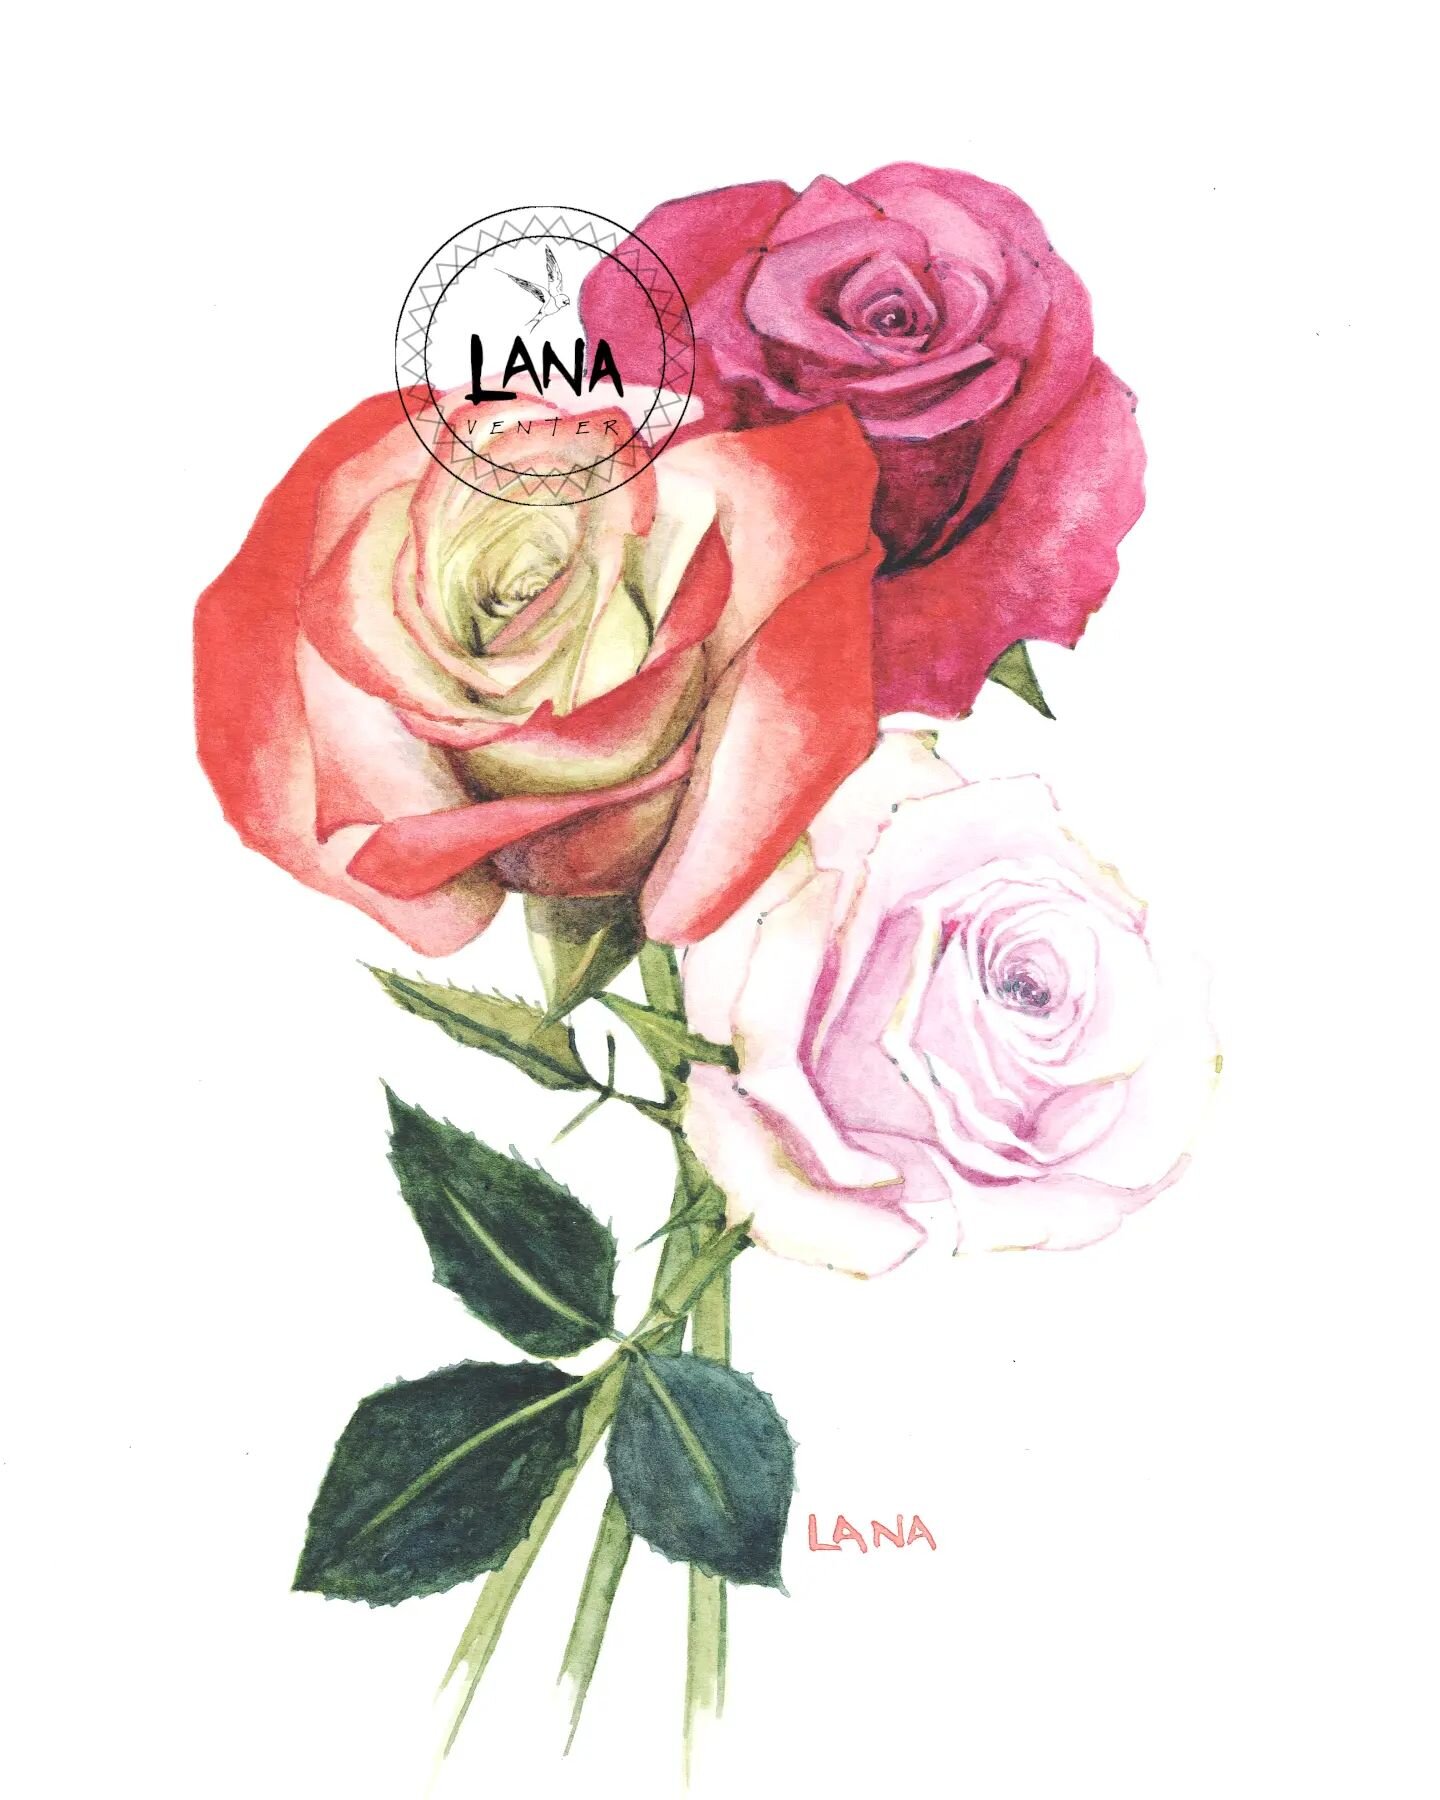 The Flowers My Mom Loved:

Roses.

Probably the all time classic pick. But in this artwork I did not go for the typical Anlee colour combo. My mom liked the bright red, pink and orange ones most.

I used reference photos my mom sent me. I bought her 